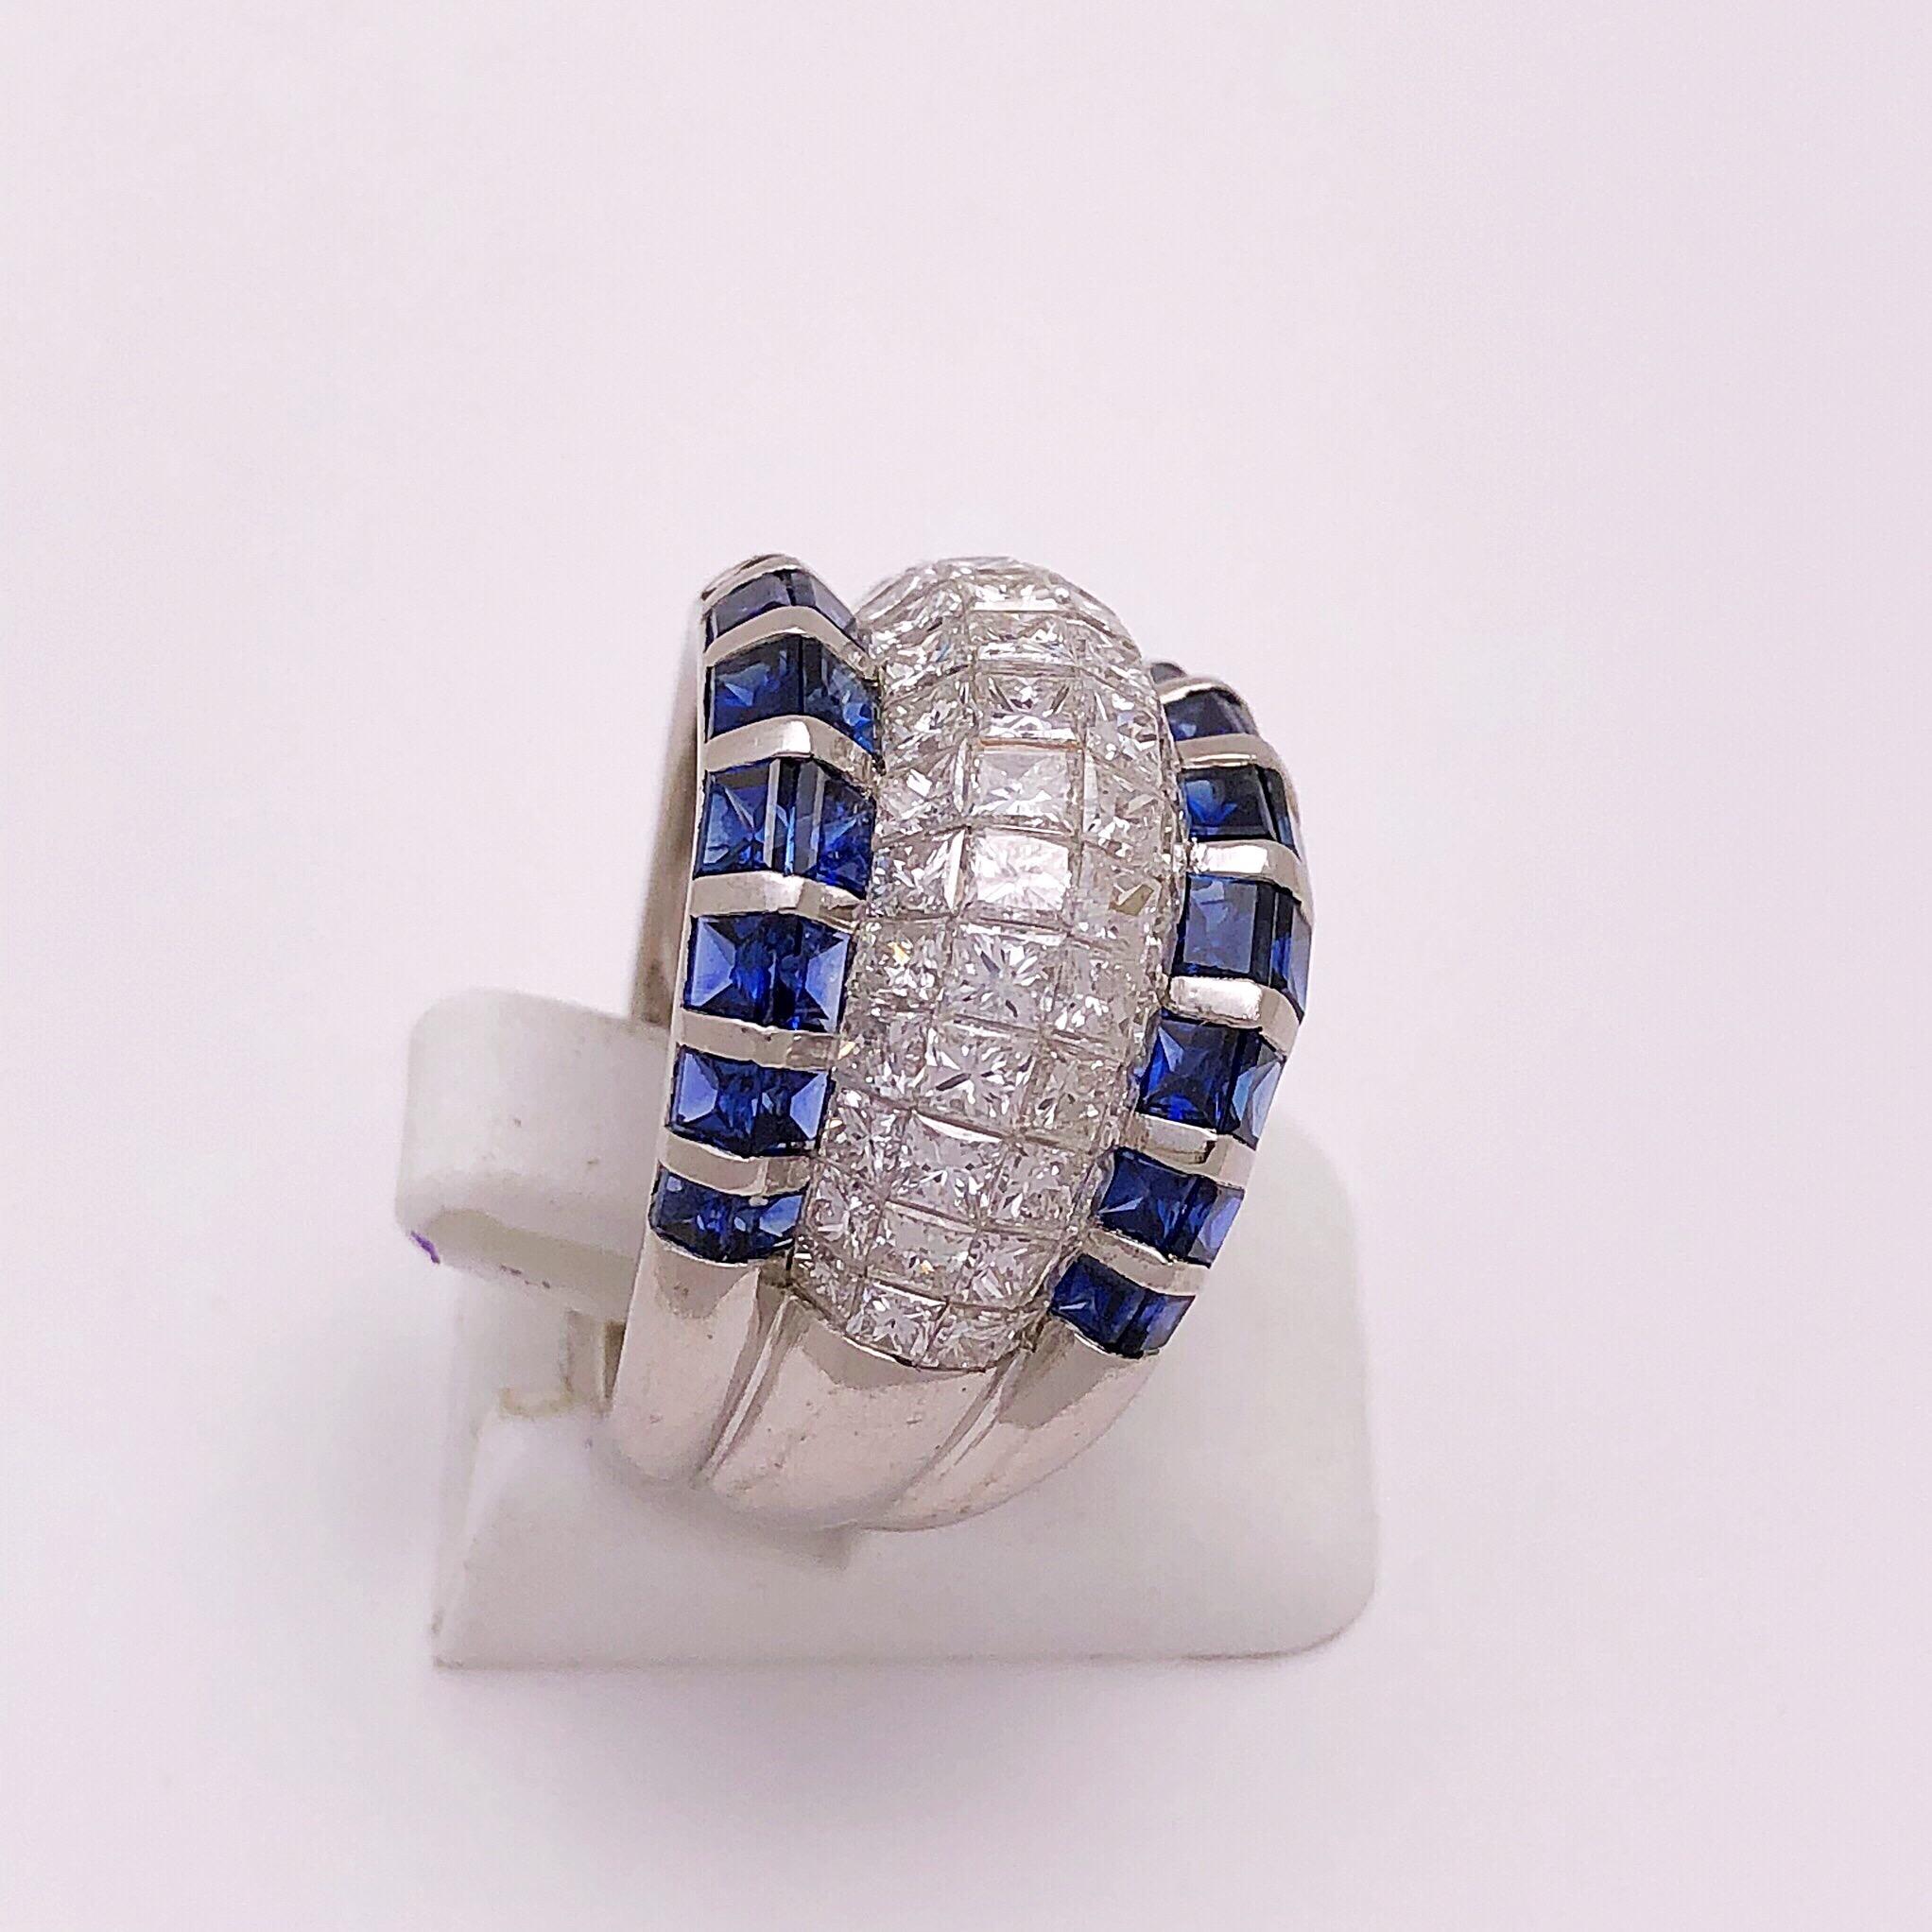 This elegant platinum ring centers four rows of invisibly set Princess cut diamonds.The diamonds are bordered on each side by two rows of Princess cut blue sapphires. Also invisibly set in a precise setting so that the two rows form an angled